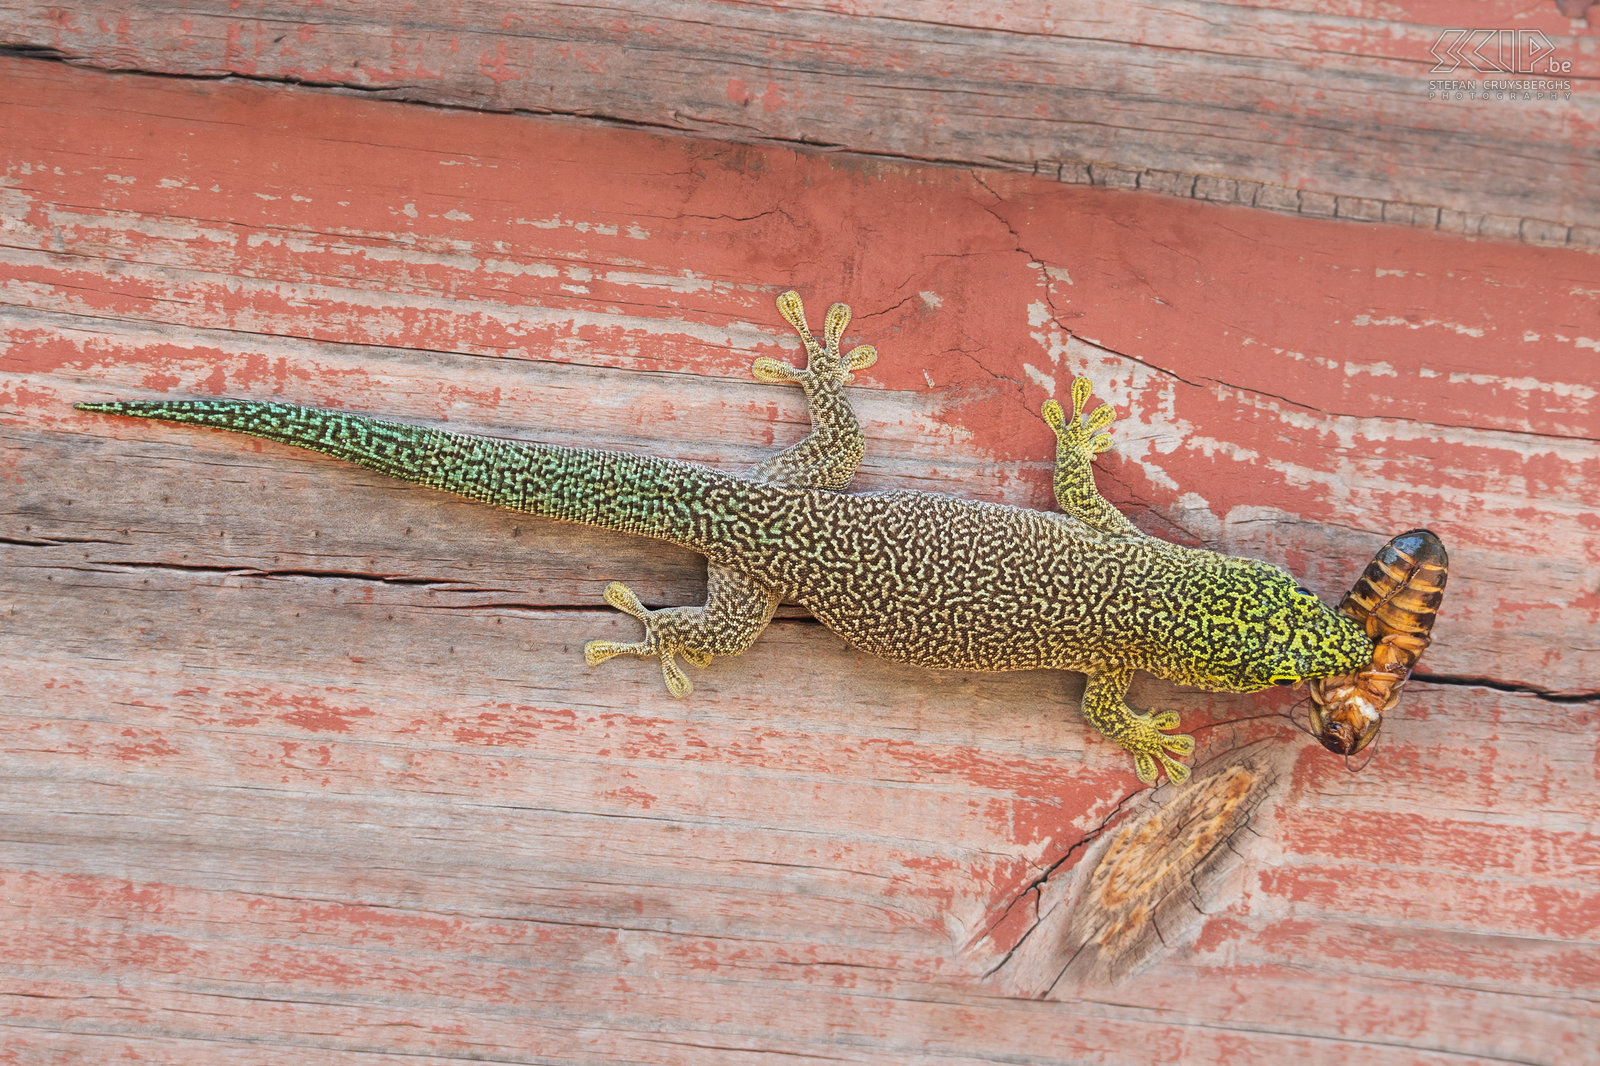 Zombitse - Standing's day gecko On our way to Ifaty in the south we also stopped in Zombitse national park to make a small hike. At the entrance we spotted a standing's day gecko (Phelsuma standingi) that had catched an insect. Stefan Cruysberghs